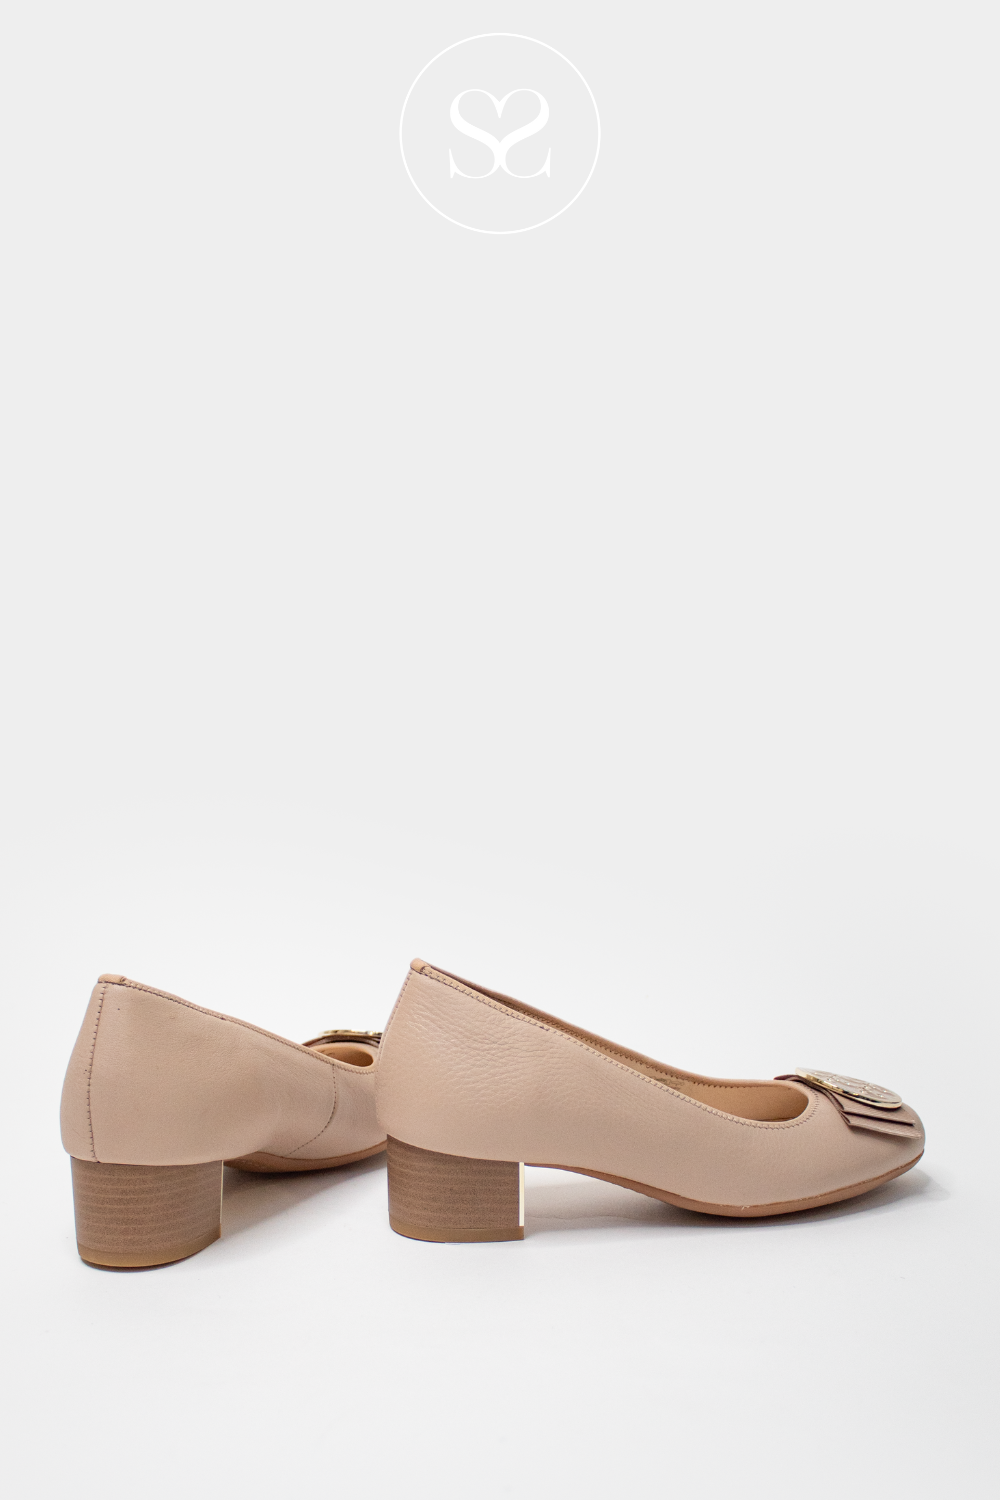 ARA 12-35807 NUDE LEATHER BLOCK HEEL WITH FRONT DETAIL